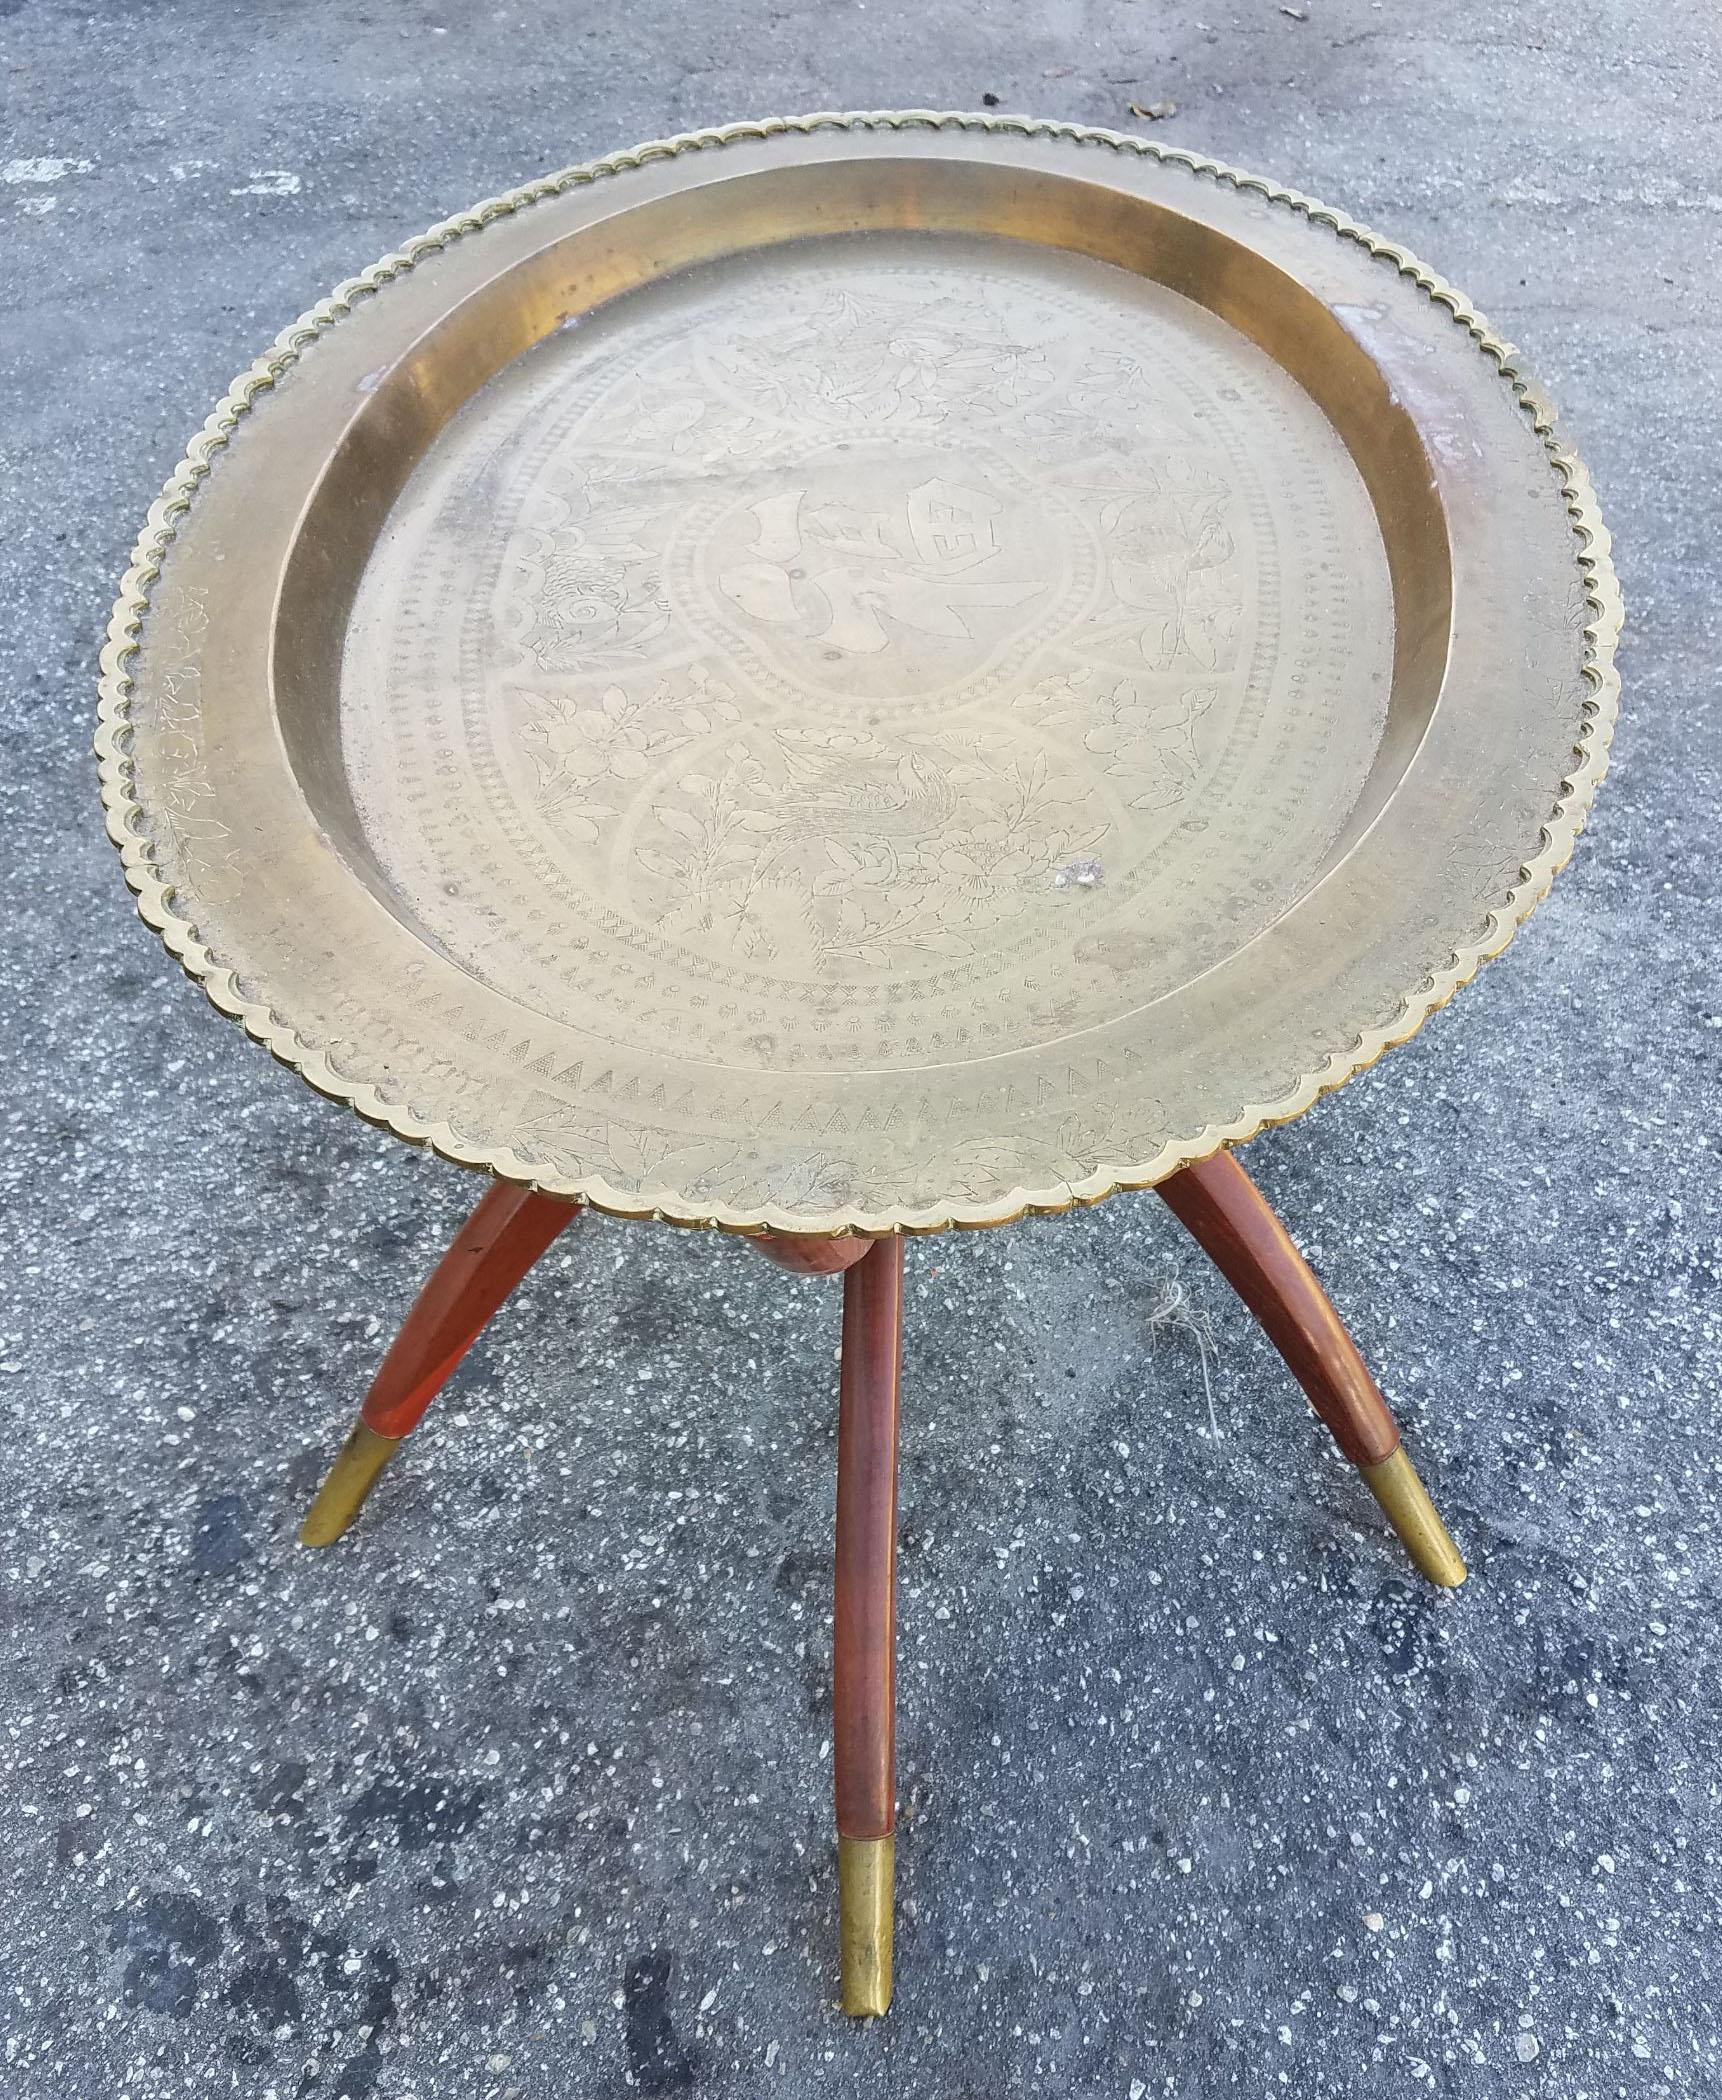 Moroccan Copper Coffee Table, Oval with Wooden Folding Base (Ende des 20. Jahrhunderts)